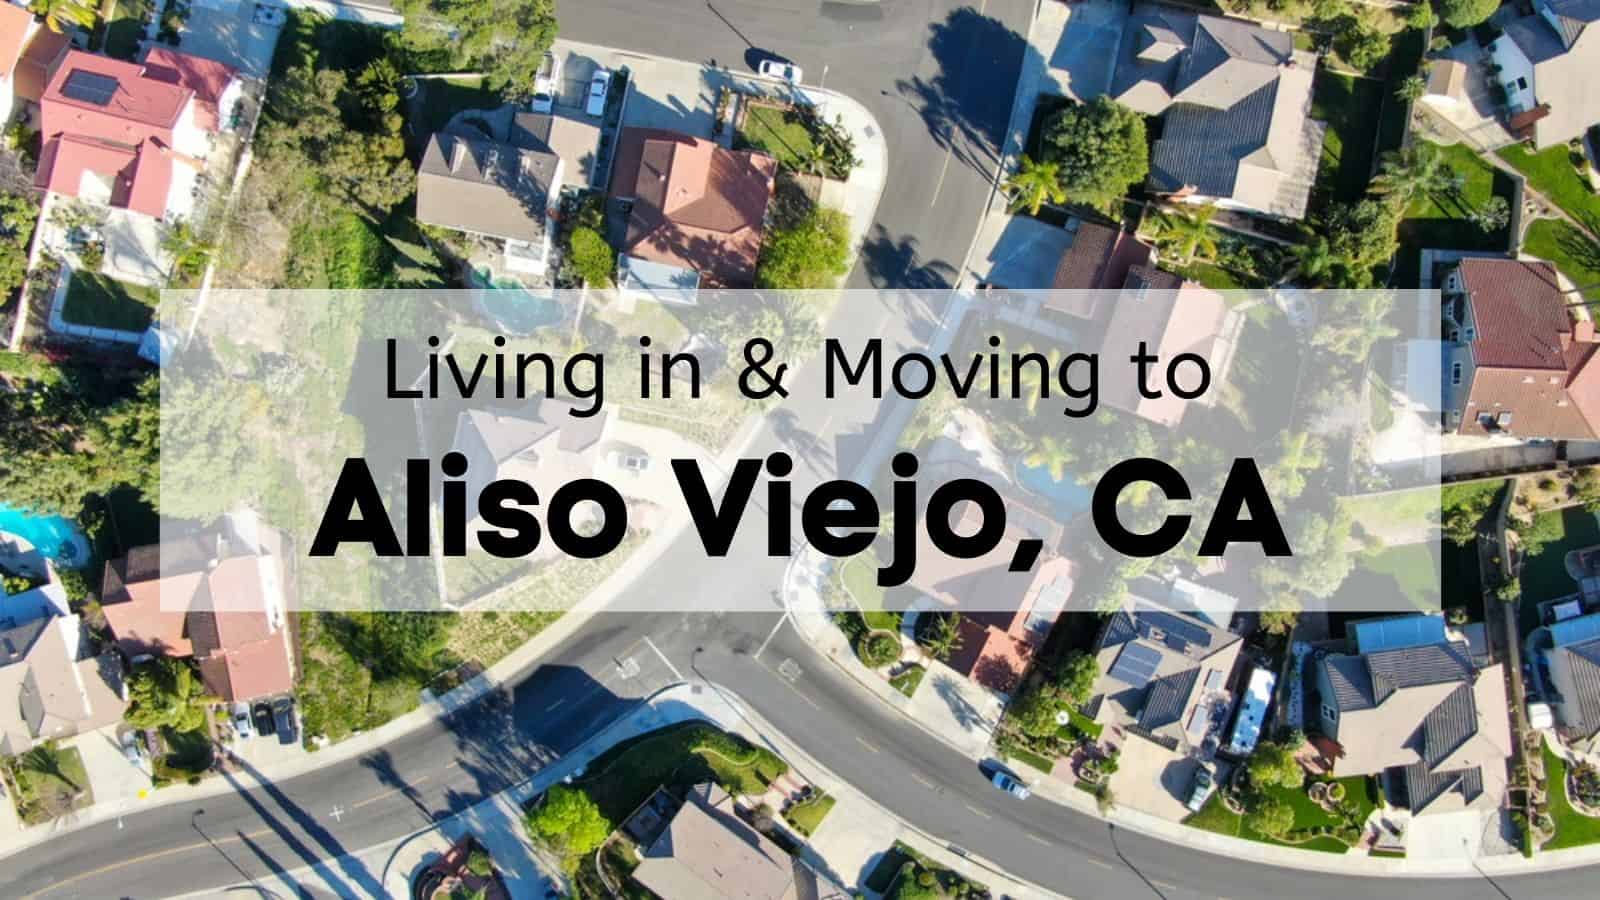 Living in & Moving to Aliso Viejo, CA